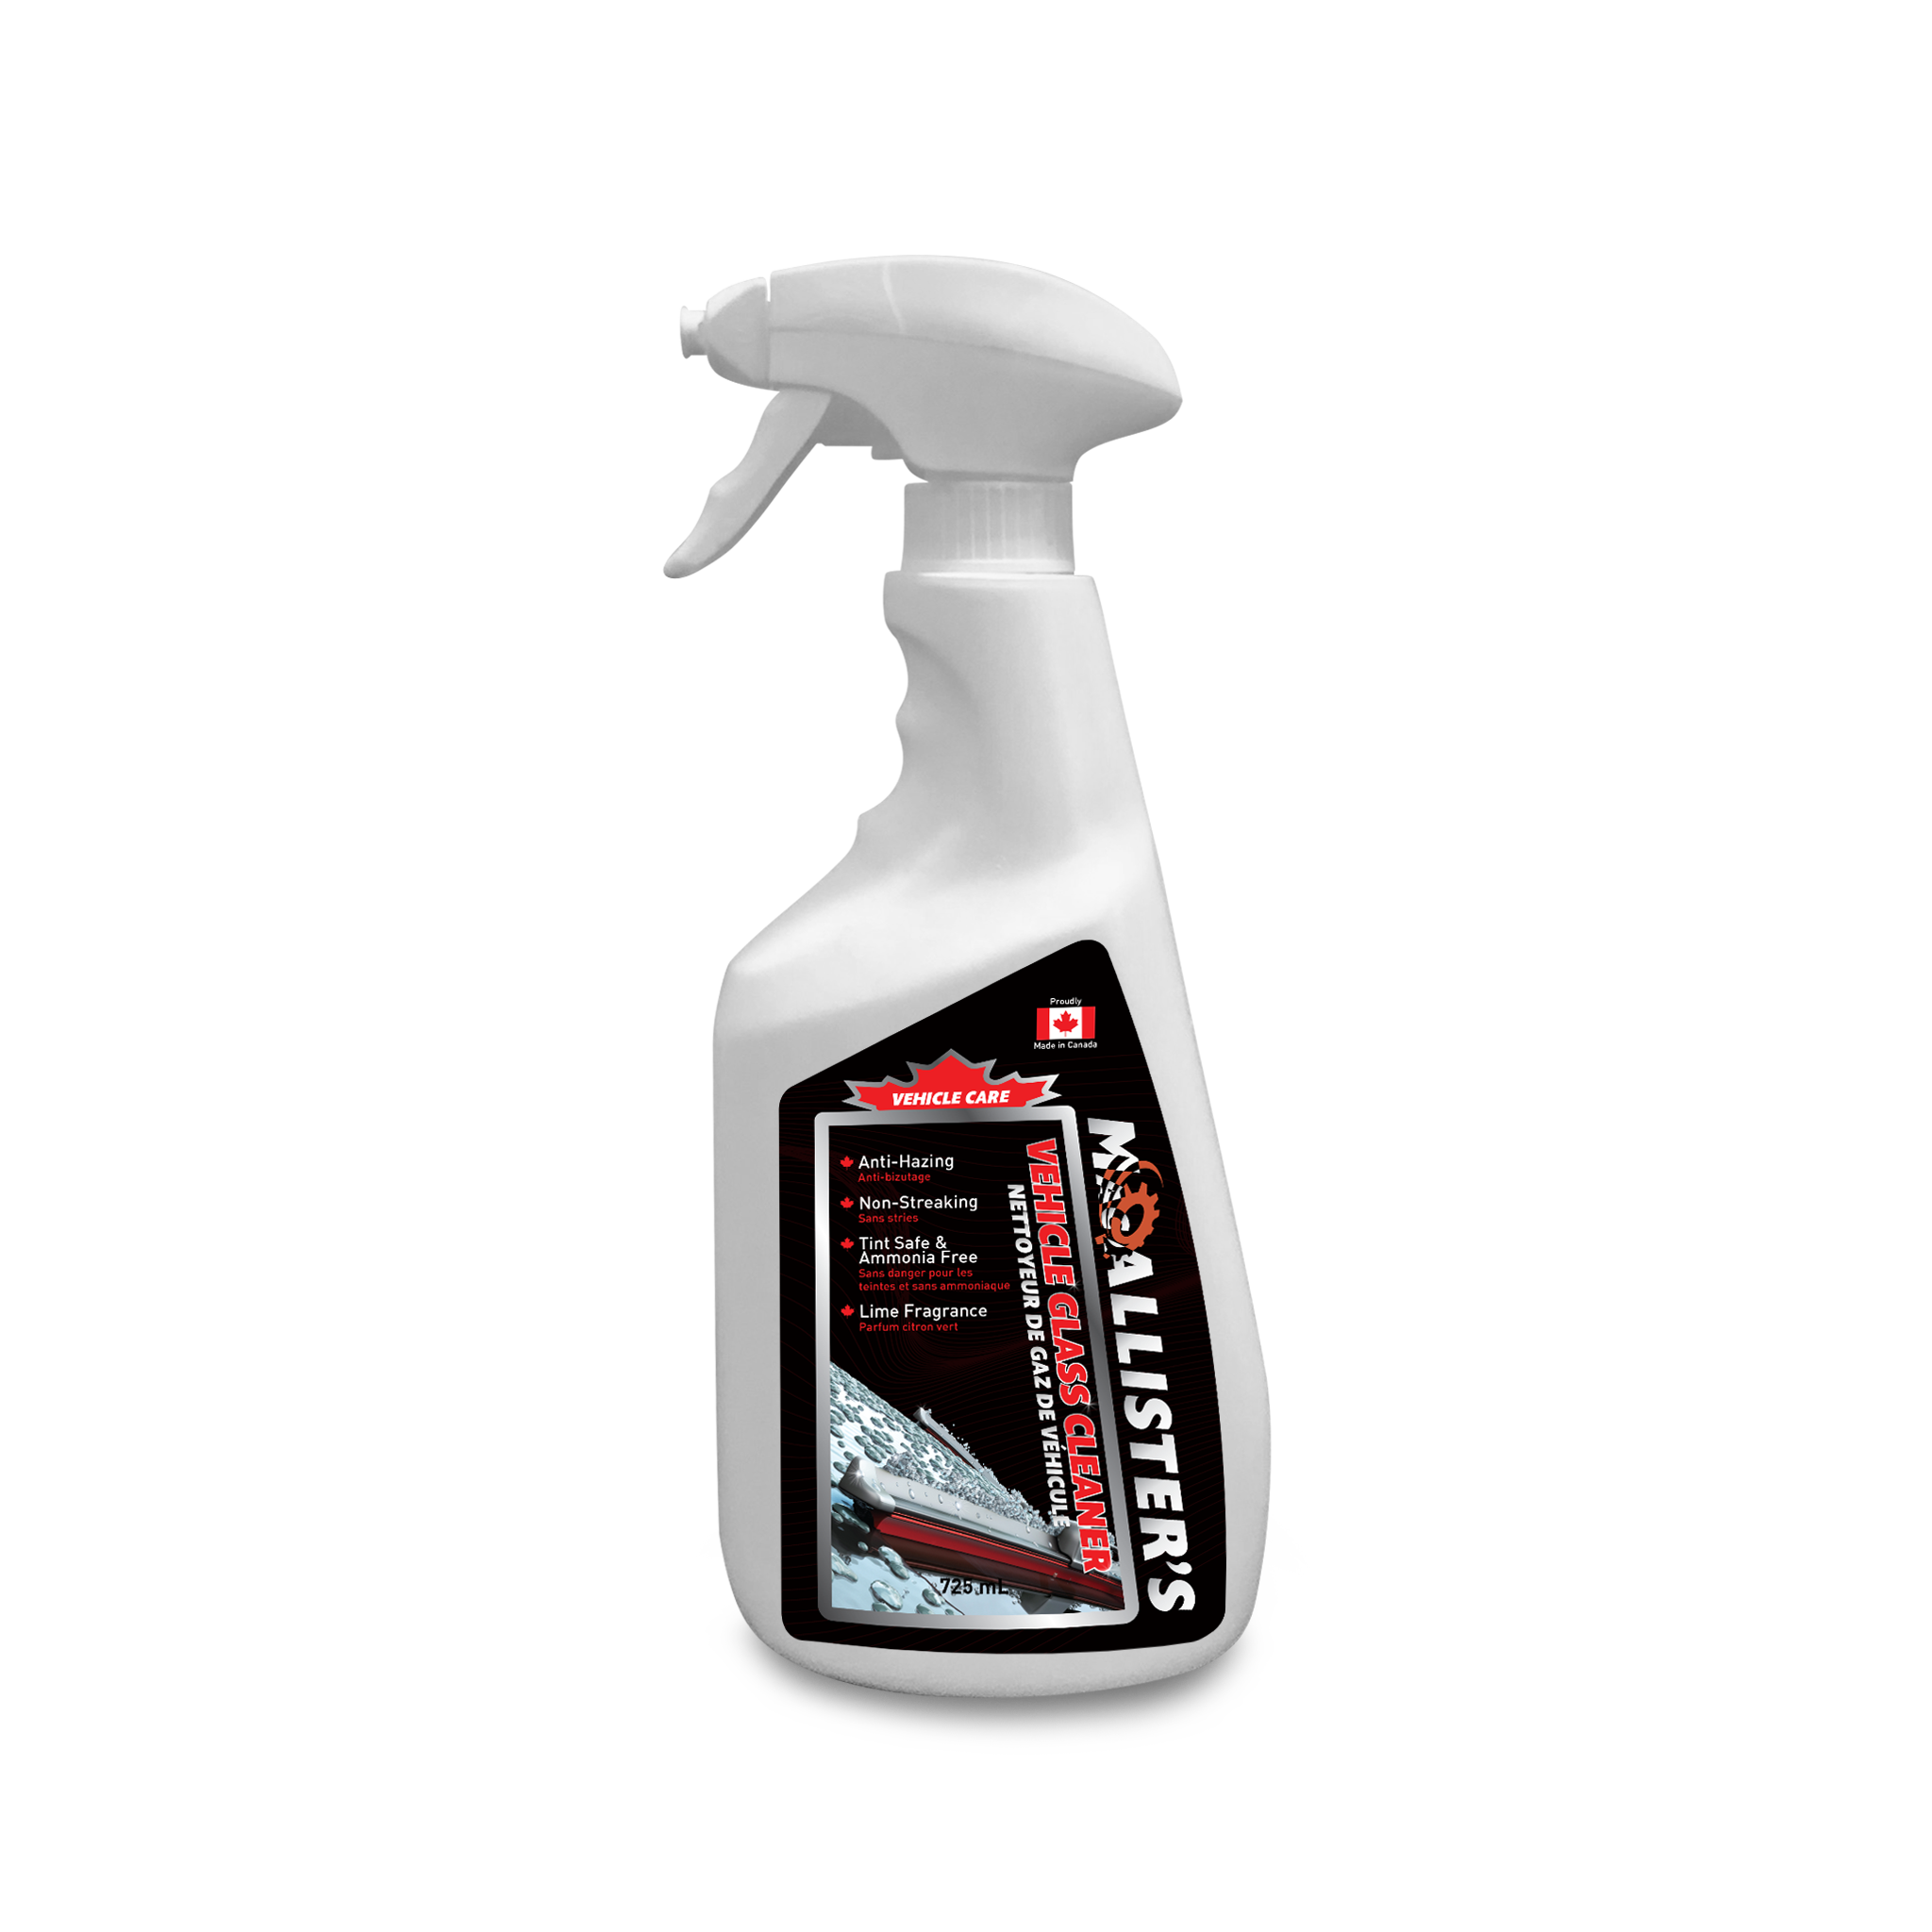 MacAllister's Vehicle Glass Cleaner